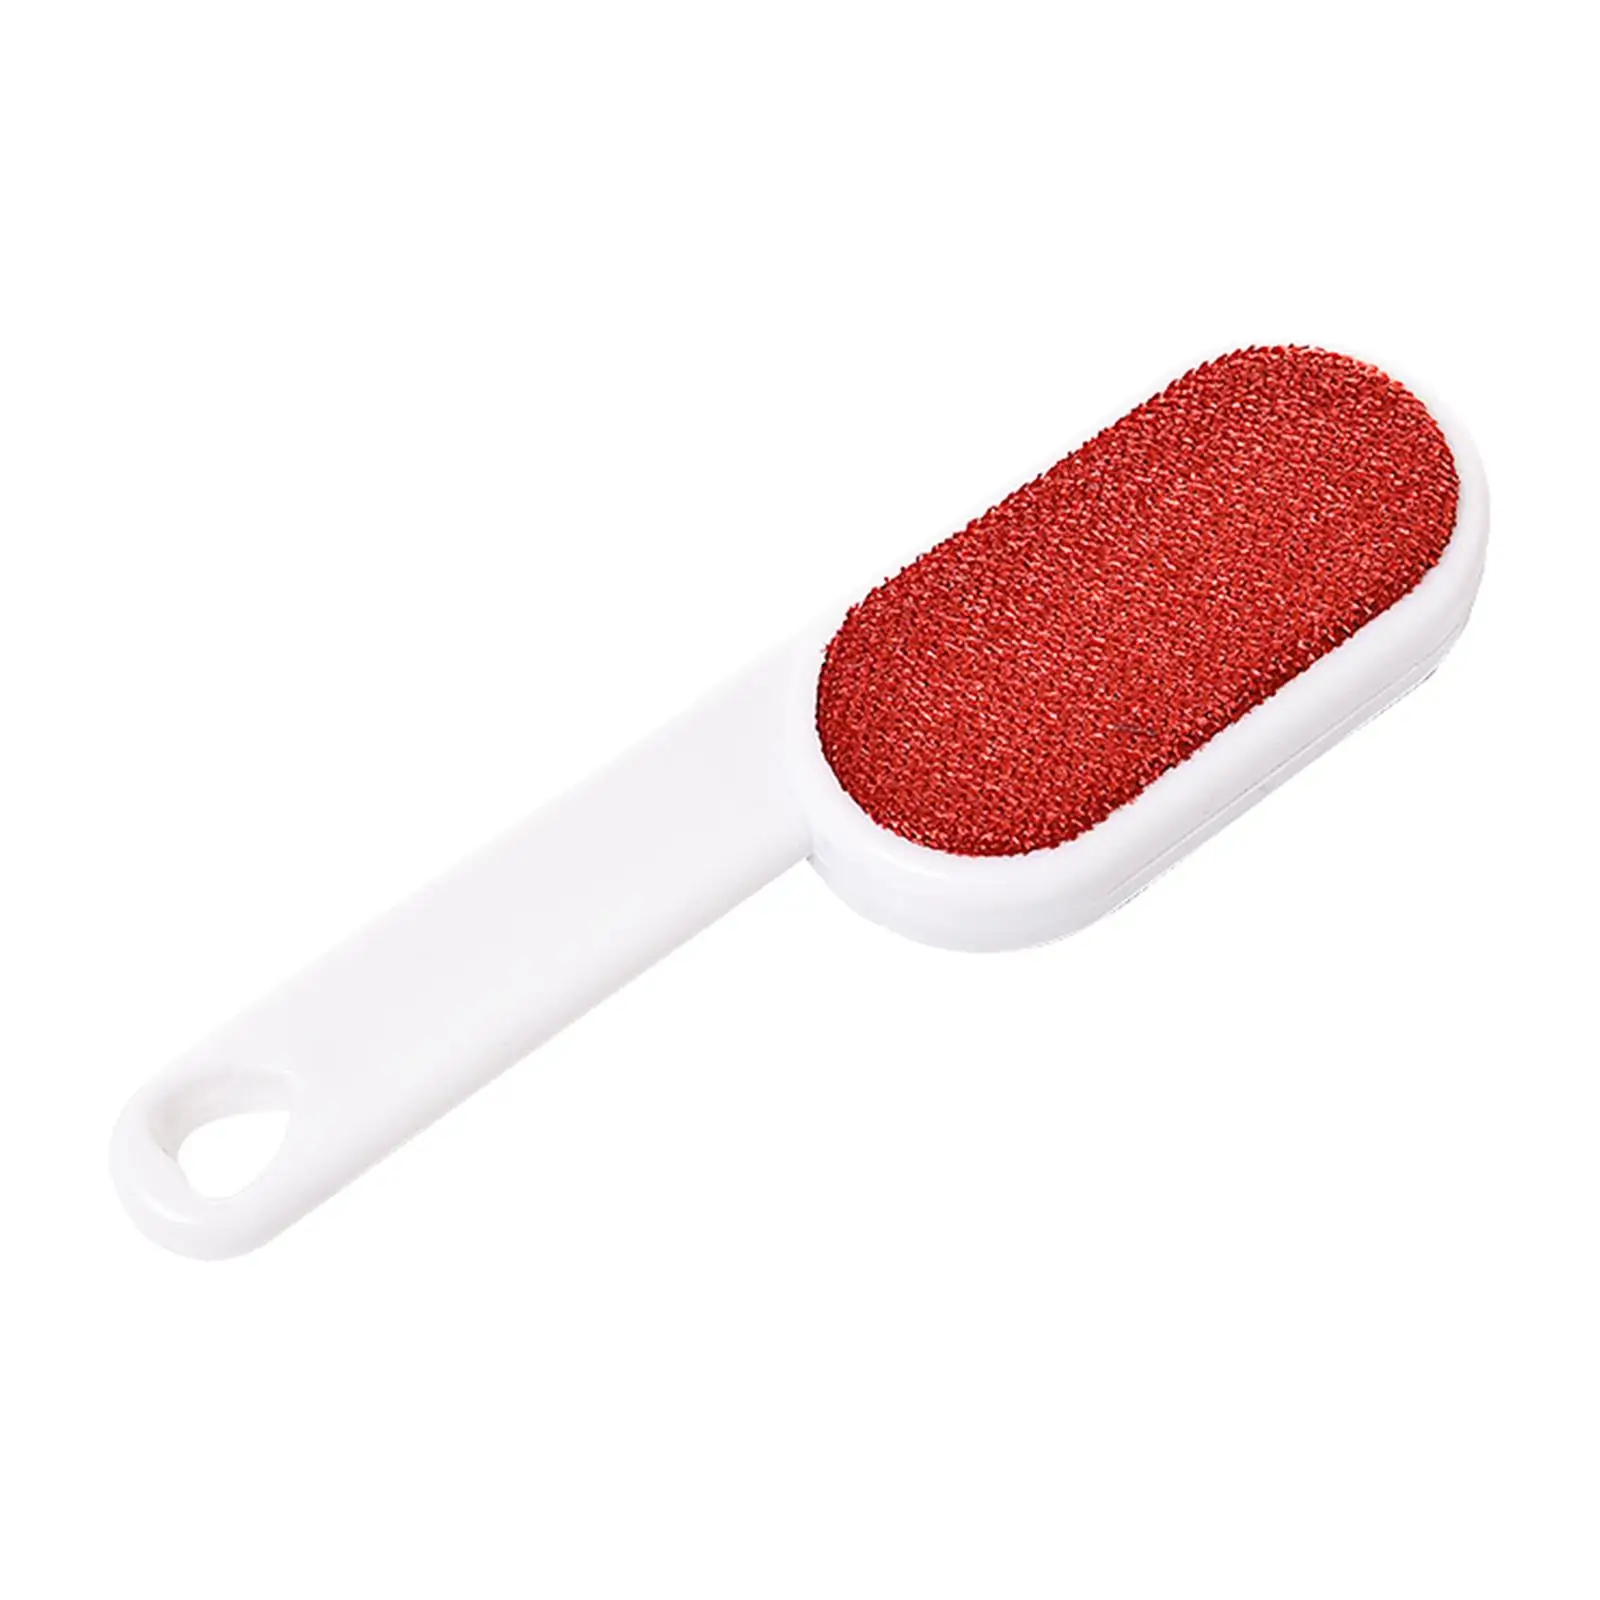 Lint Remover Brush Manual Effective Double Sided Portable Lint Cleaner Pet Hair Remover for Garment Carpet Rug Sweater Blanket